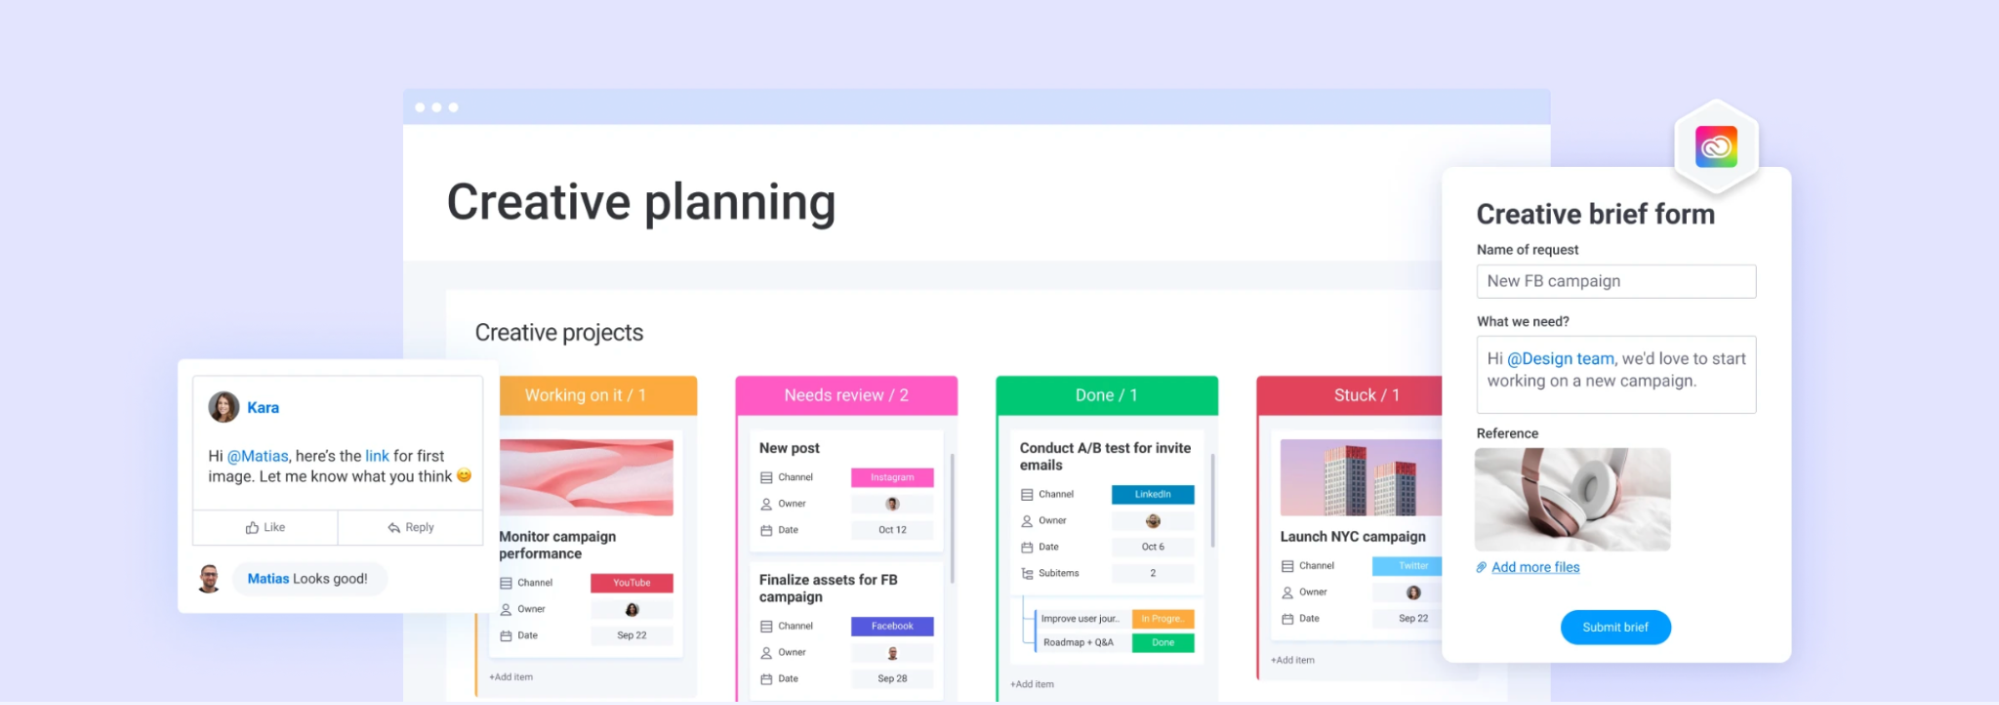 Many people like Monday’s color-coded user interface, and “Pulses” that keep track of the progress status of tasks. Similar to Asana, you can view your project in different ways, depending on what works best for your team.